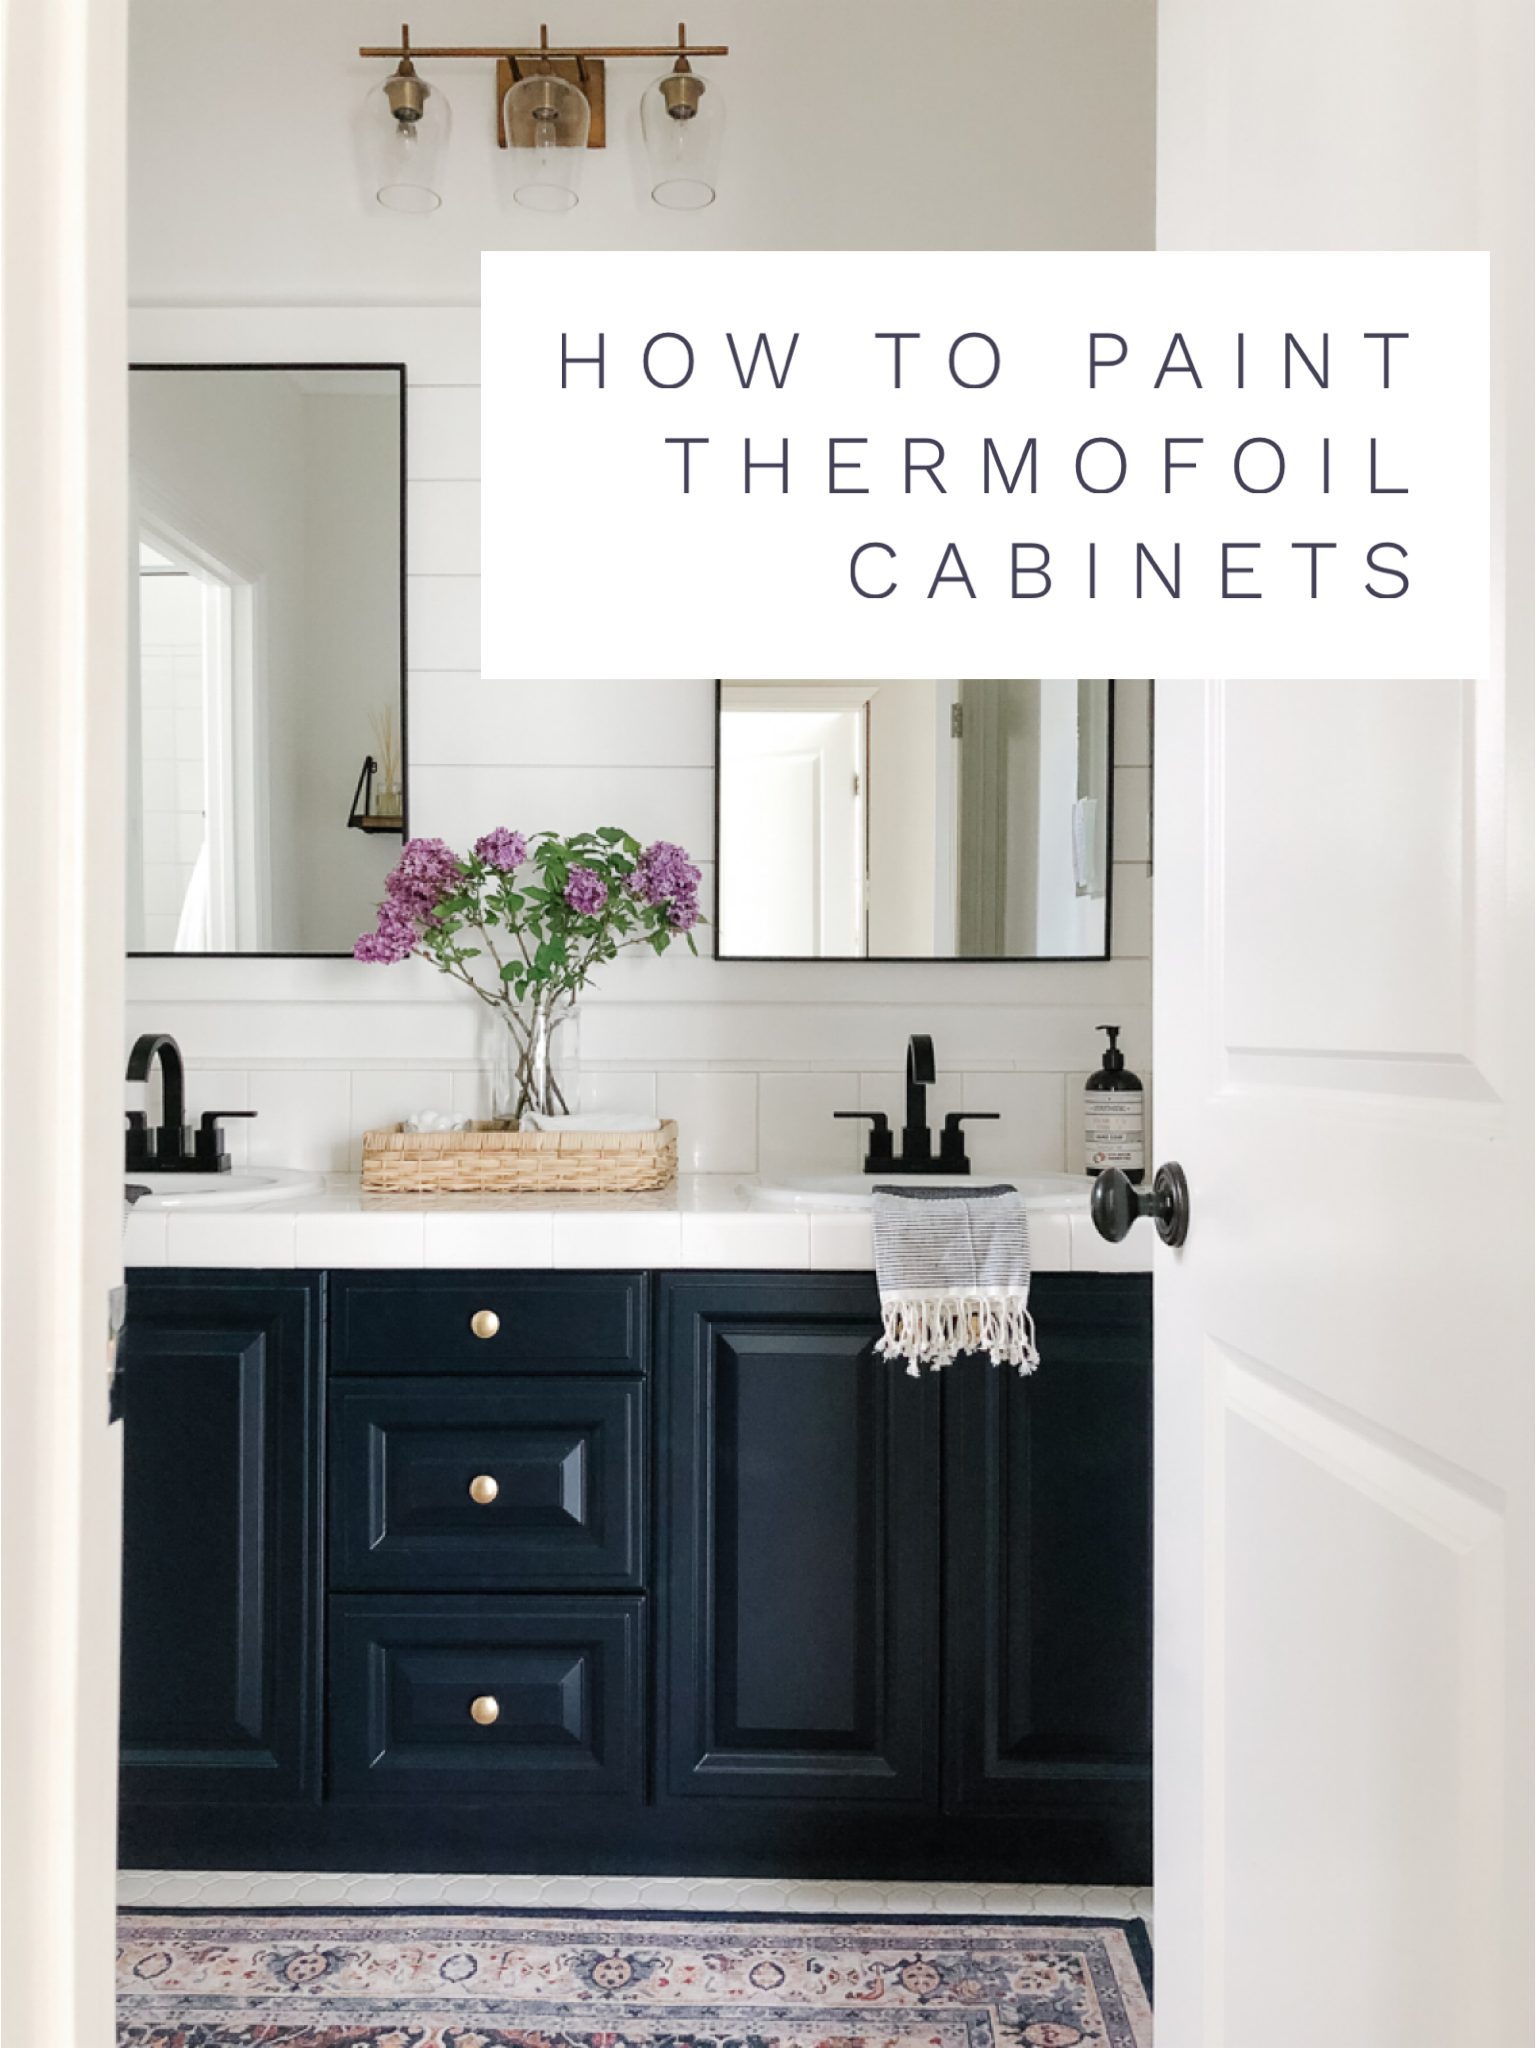 How To Paint Theril Cabinets A, How To Sand And Paint Bathroom Cabinets